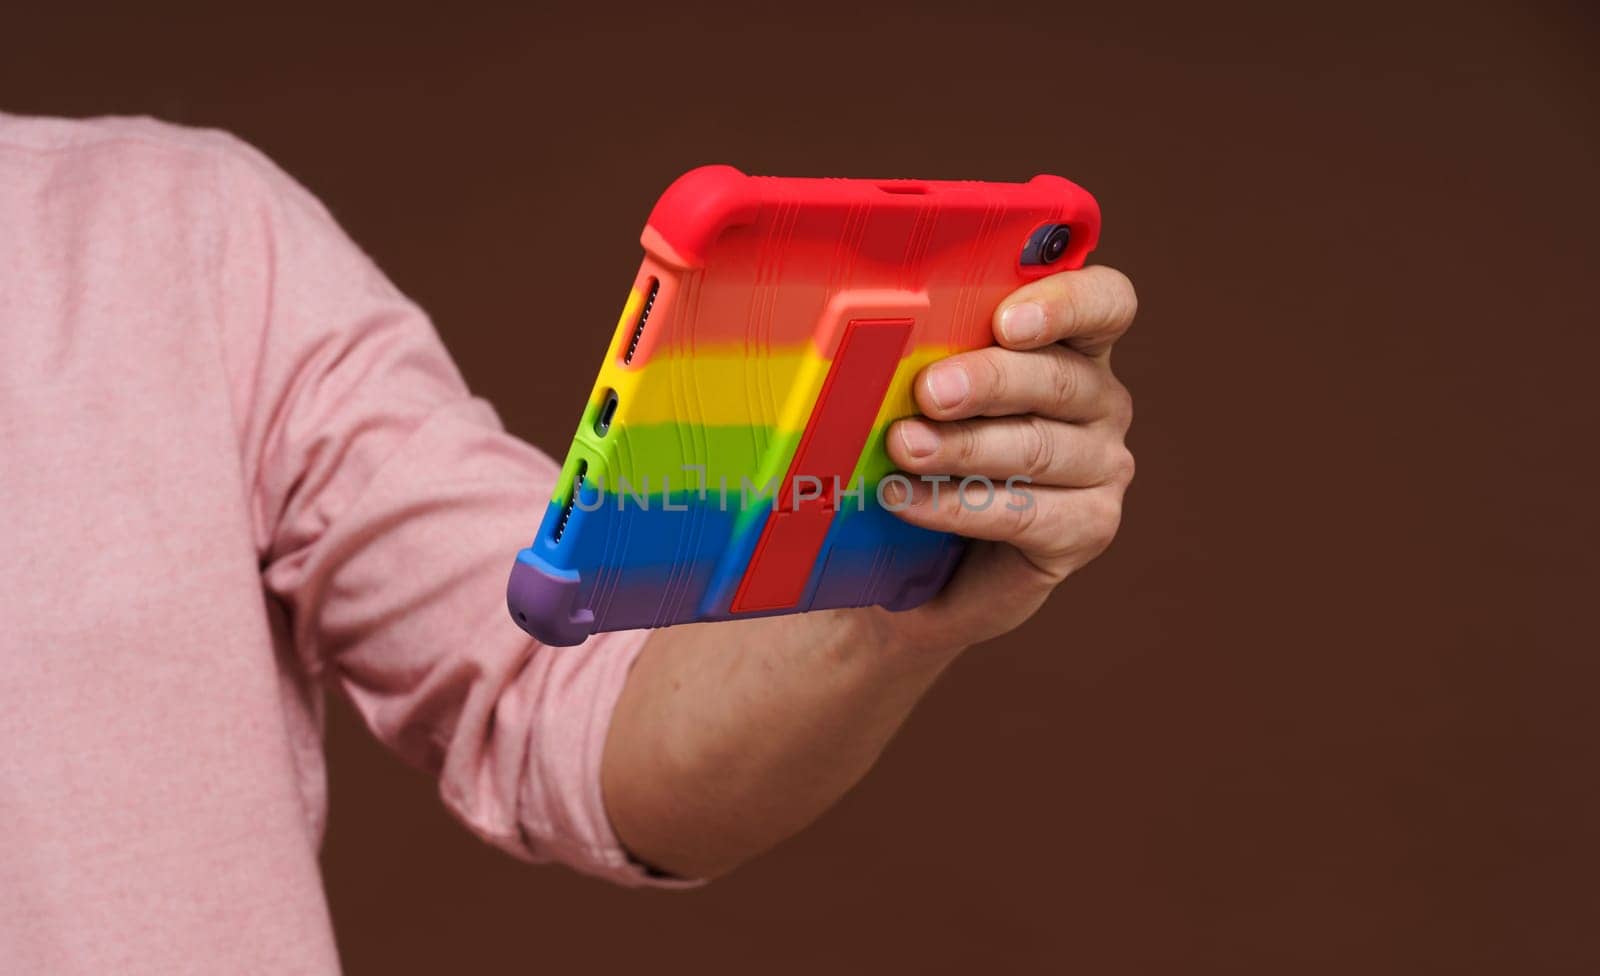 Sign of gay culture and LGBTQ pride representing man's hand holding pocket PC adorned in rainbow colors, Rainbow symbolism reflects diversity and inclusivity of LGBTQ community. by LipikStockMedia